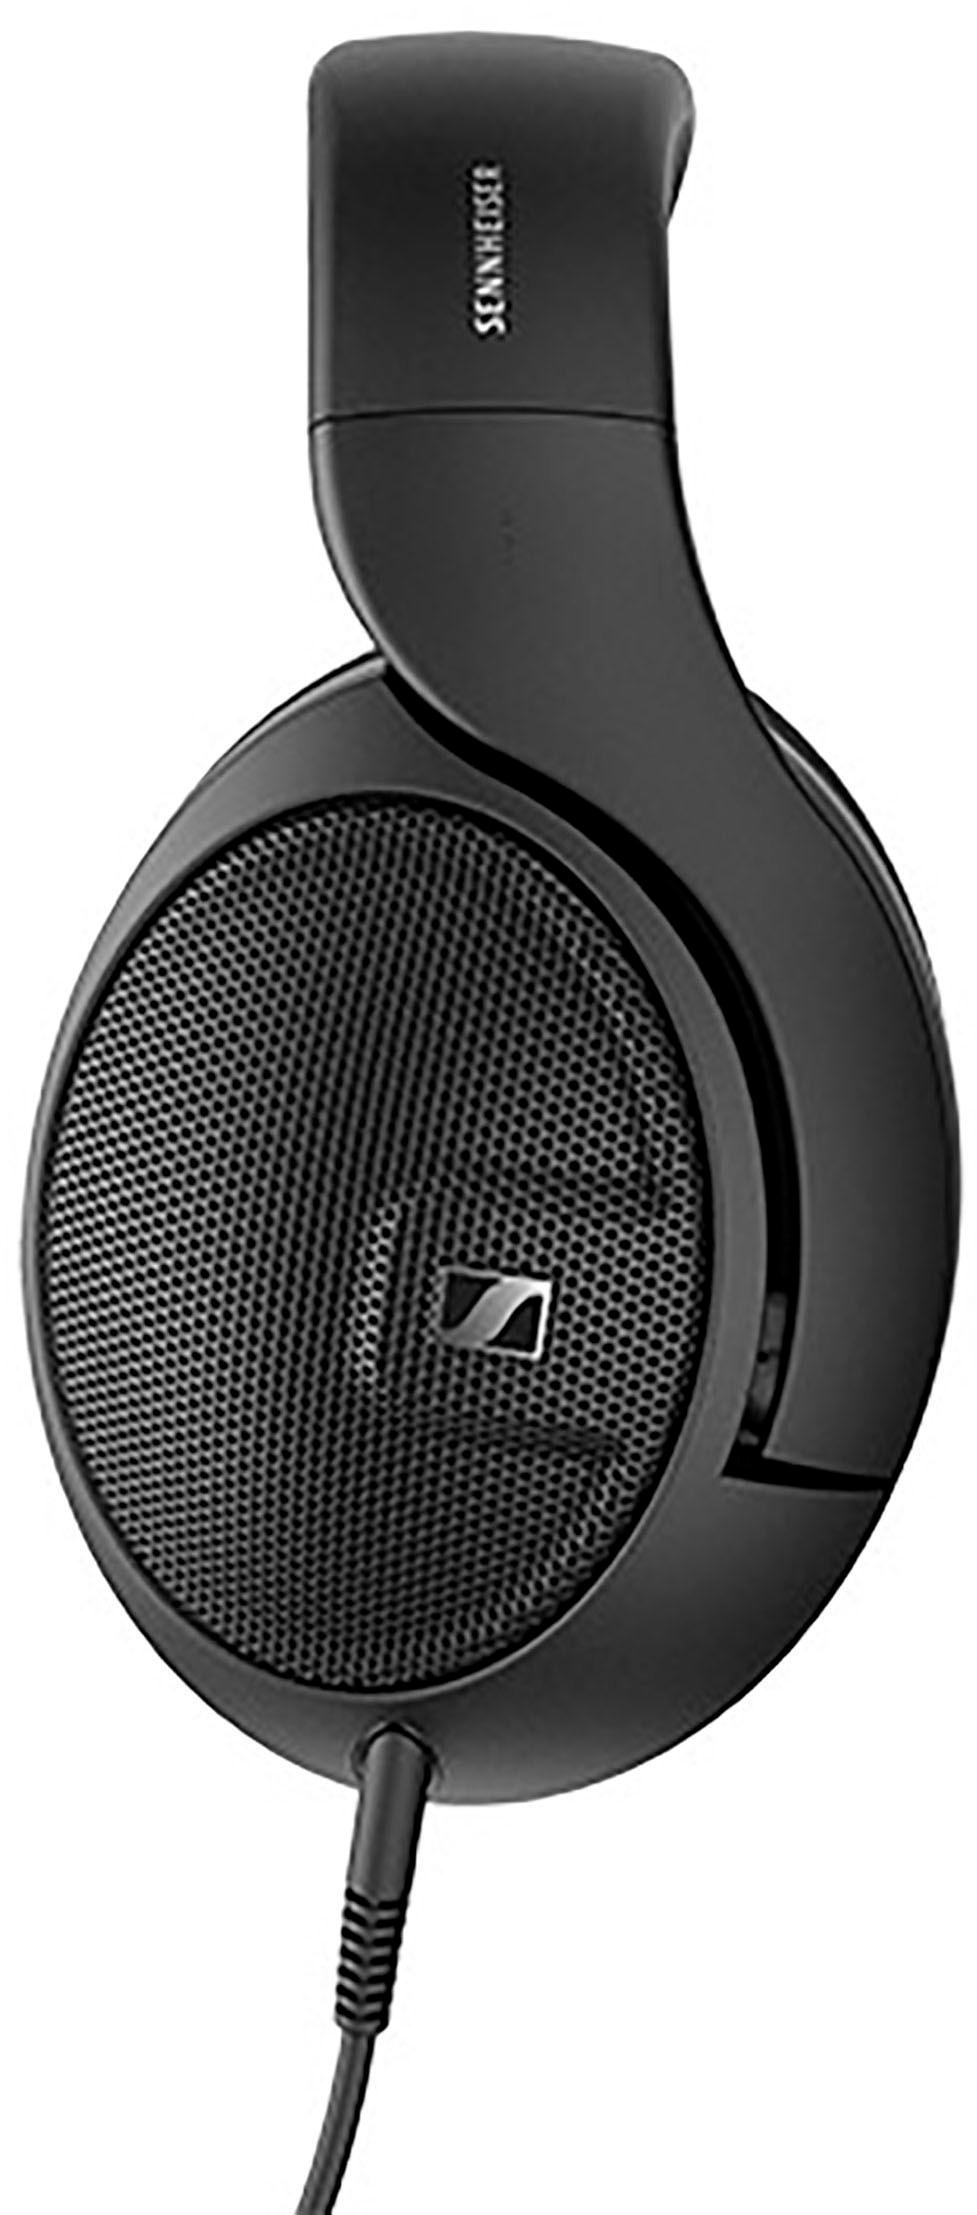 Angle View: Morpheus 360 - SERENITY Wireless Over-the-Ear Headphones with Microphone - Black/Gold